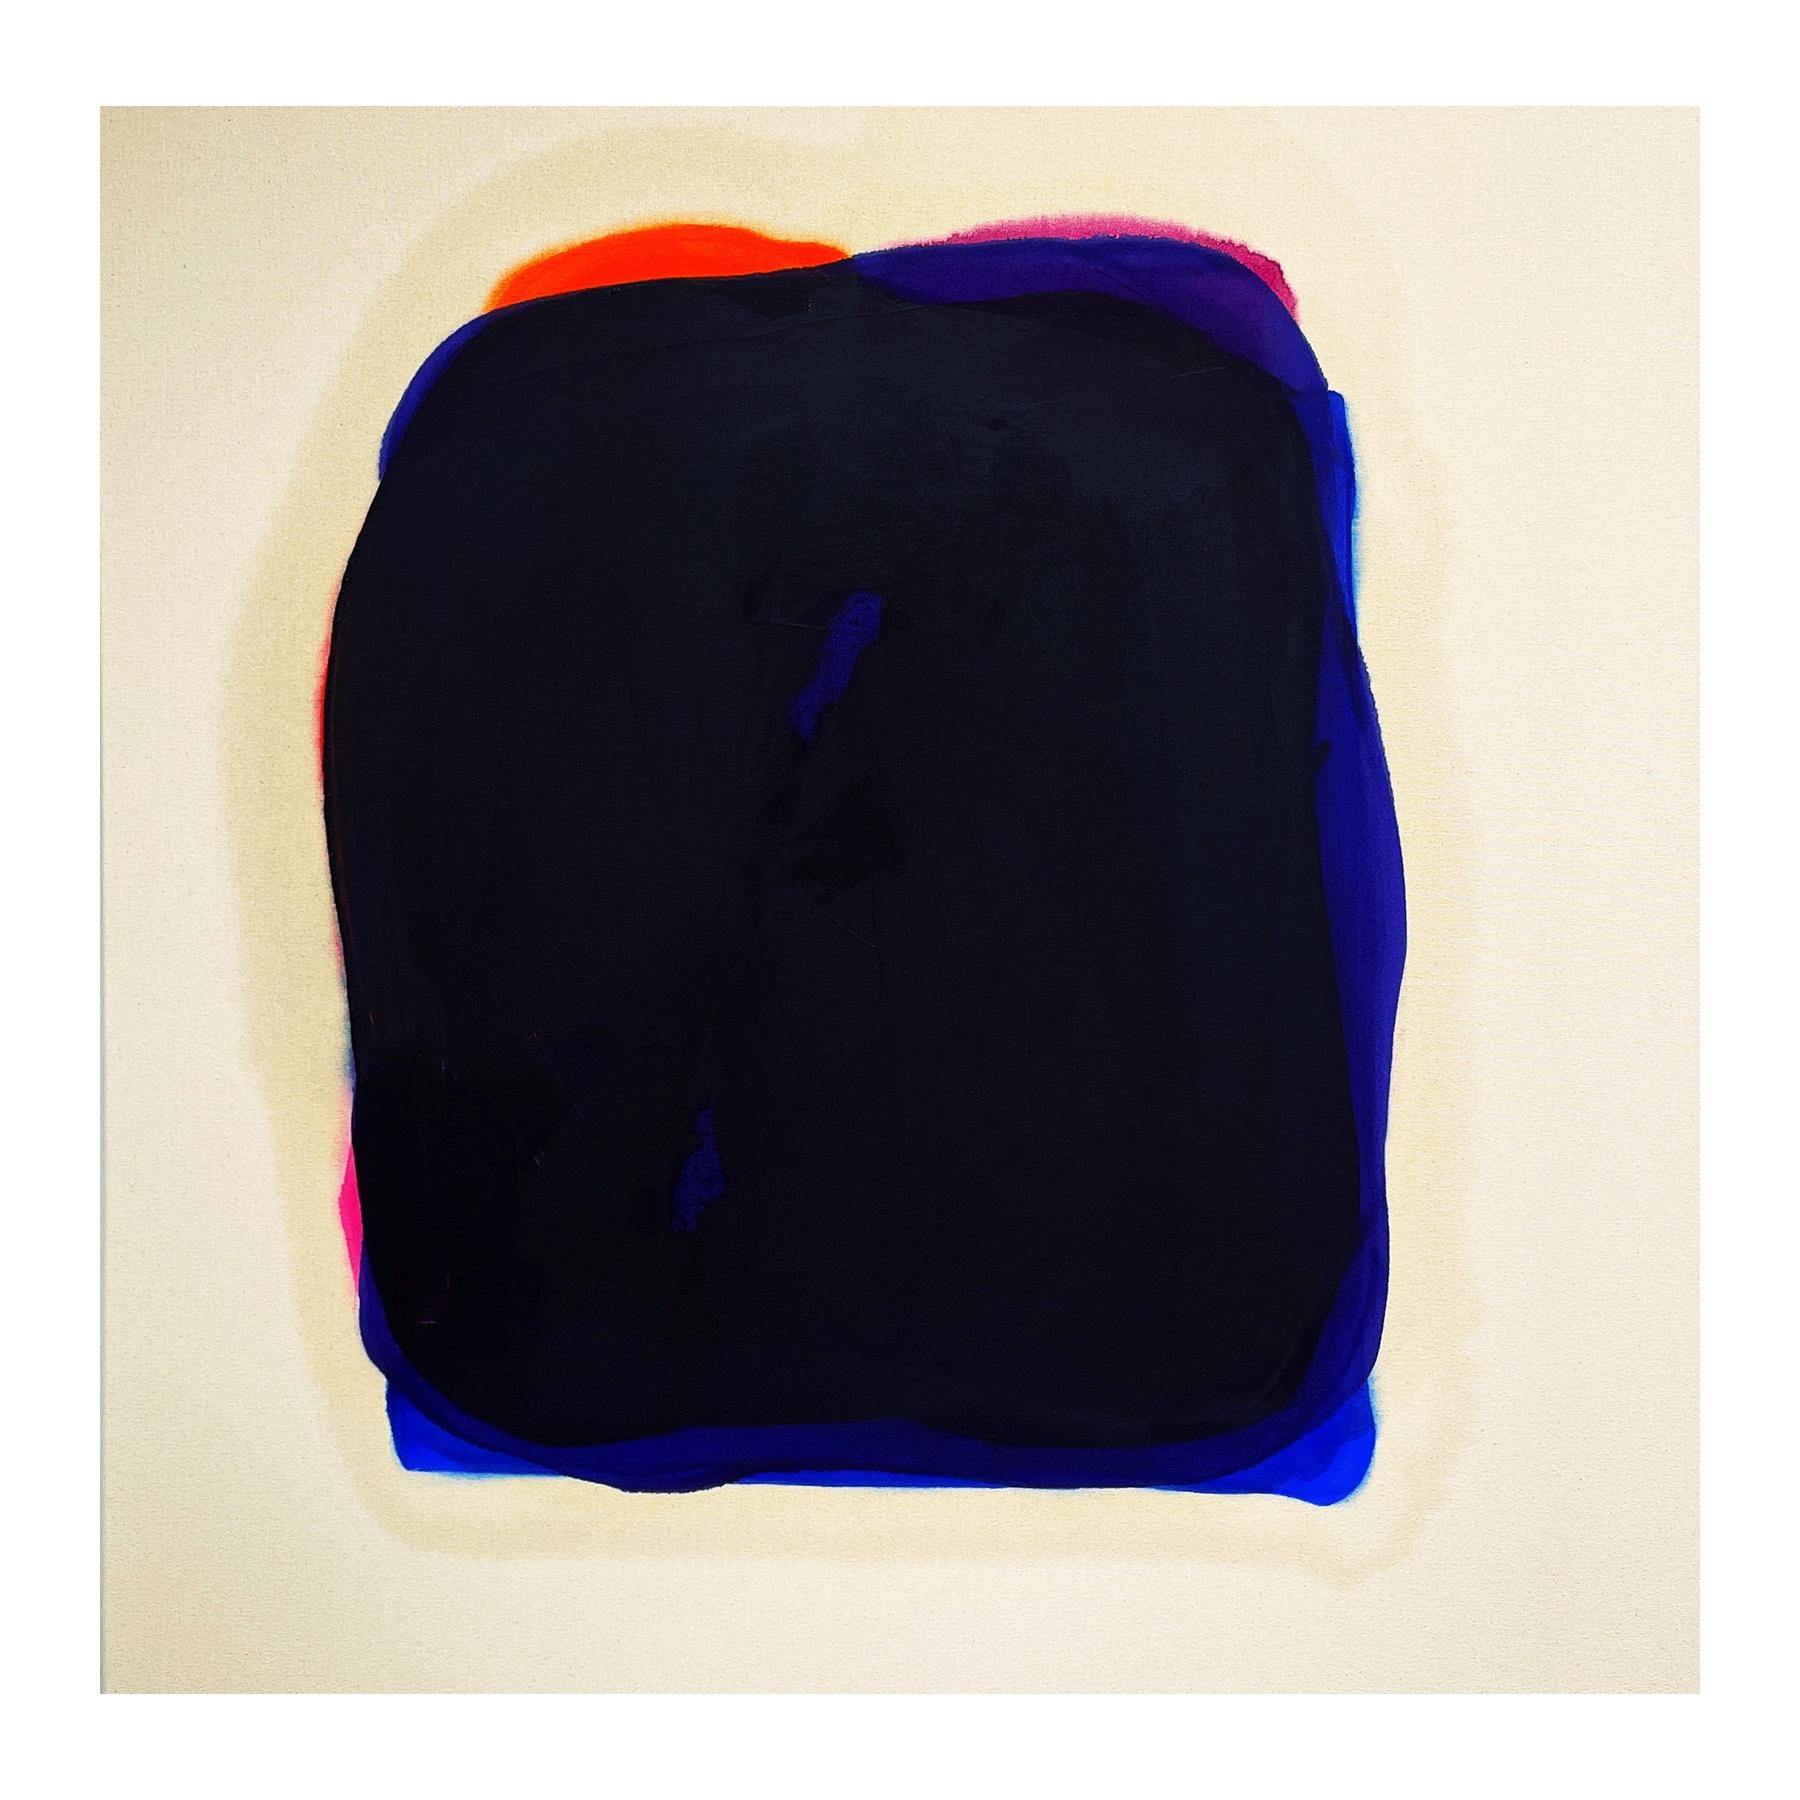 Contemporary abstract painting by Houston-based artist Gary Griffin. The work features a central amorphous shape created with diffused layers of black, pink, and orange paint against an off-white background. Signed and titled on the reverse.